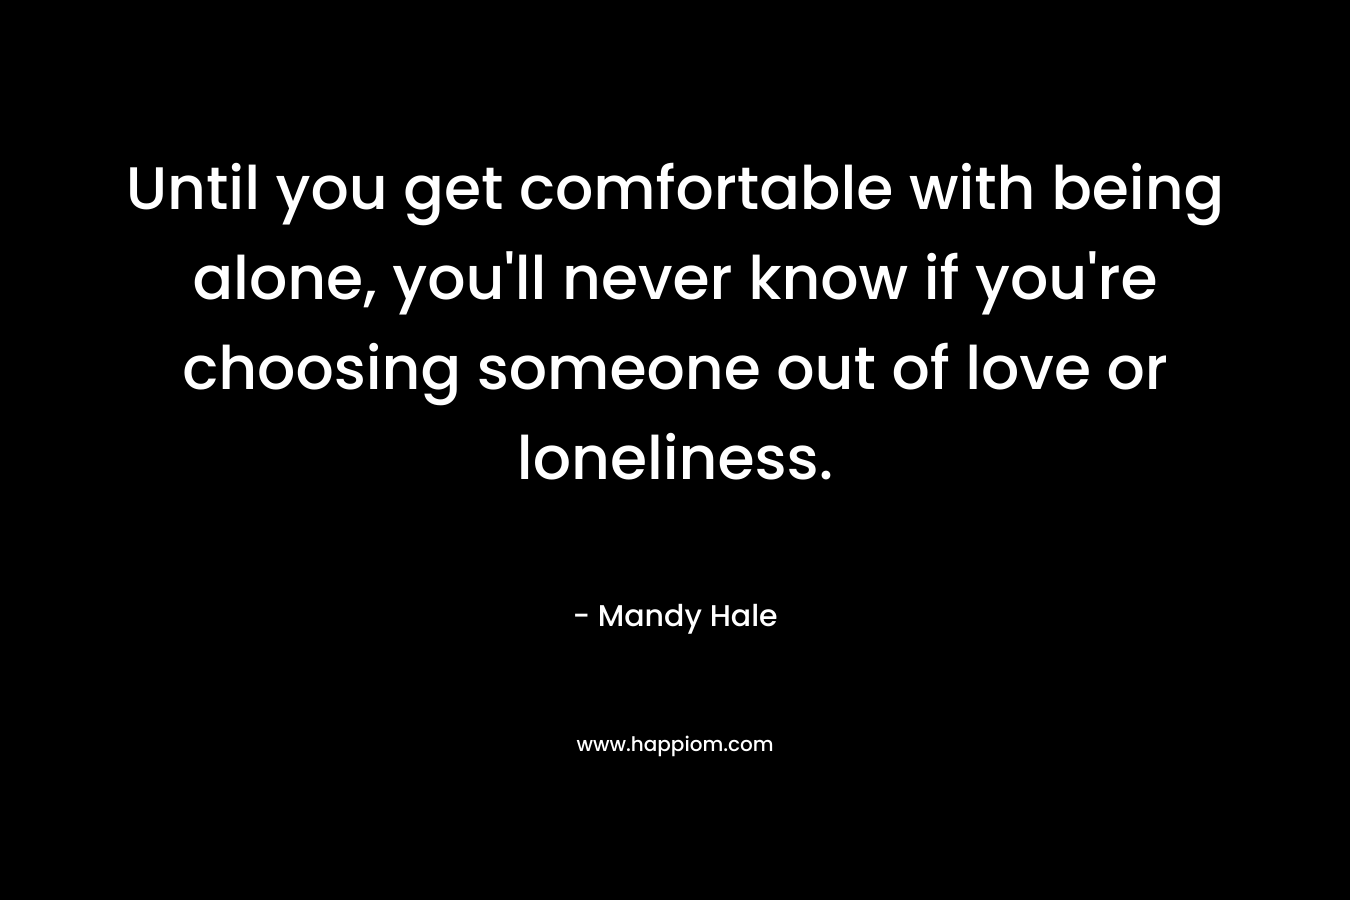 Until you get comfortable with being alone, you'll never know if you're choosing someone out of love or loneliness.